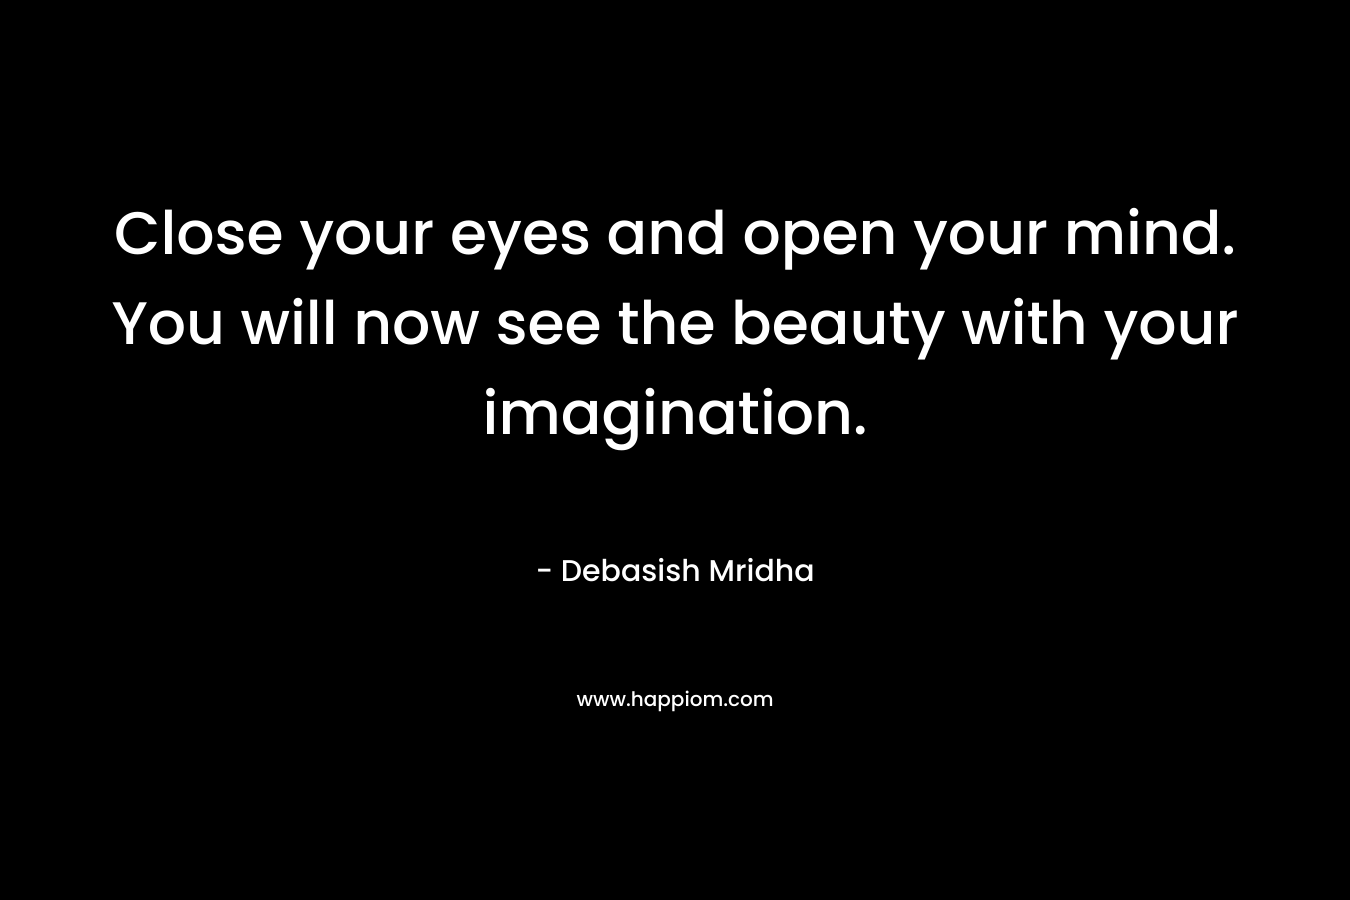 Close your eyes and open your mind. You will now see the beauty with your imagination.